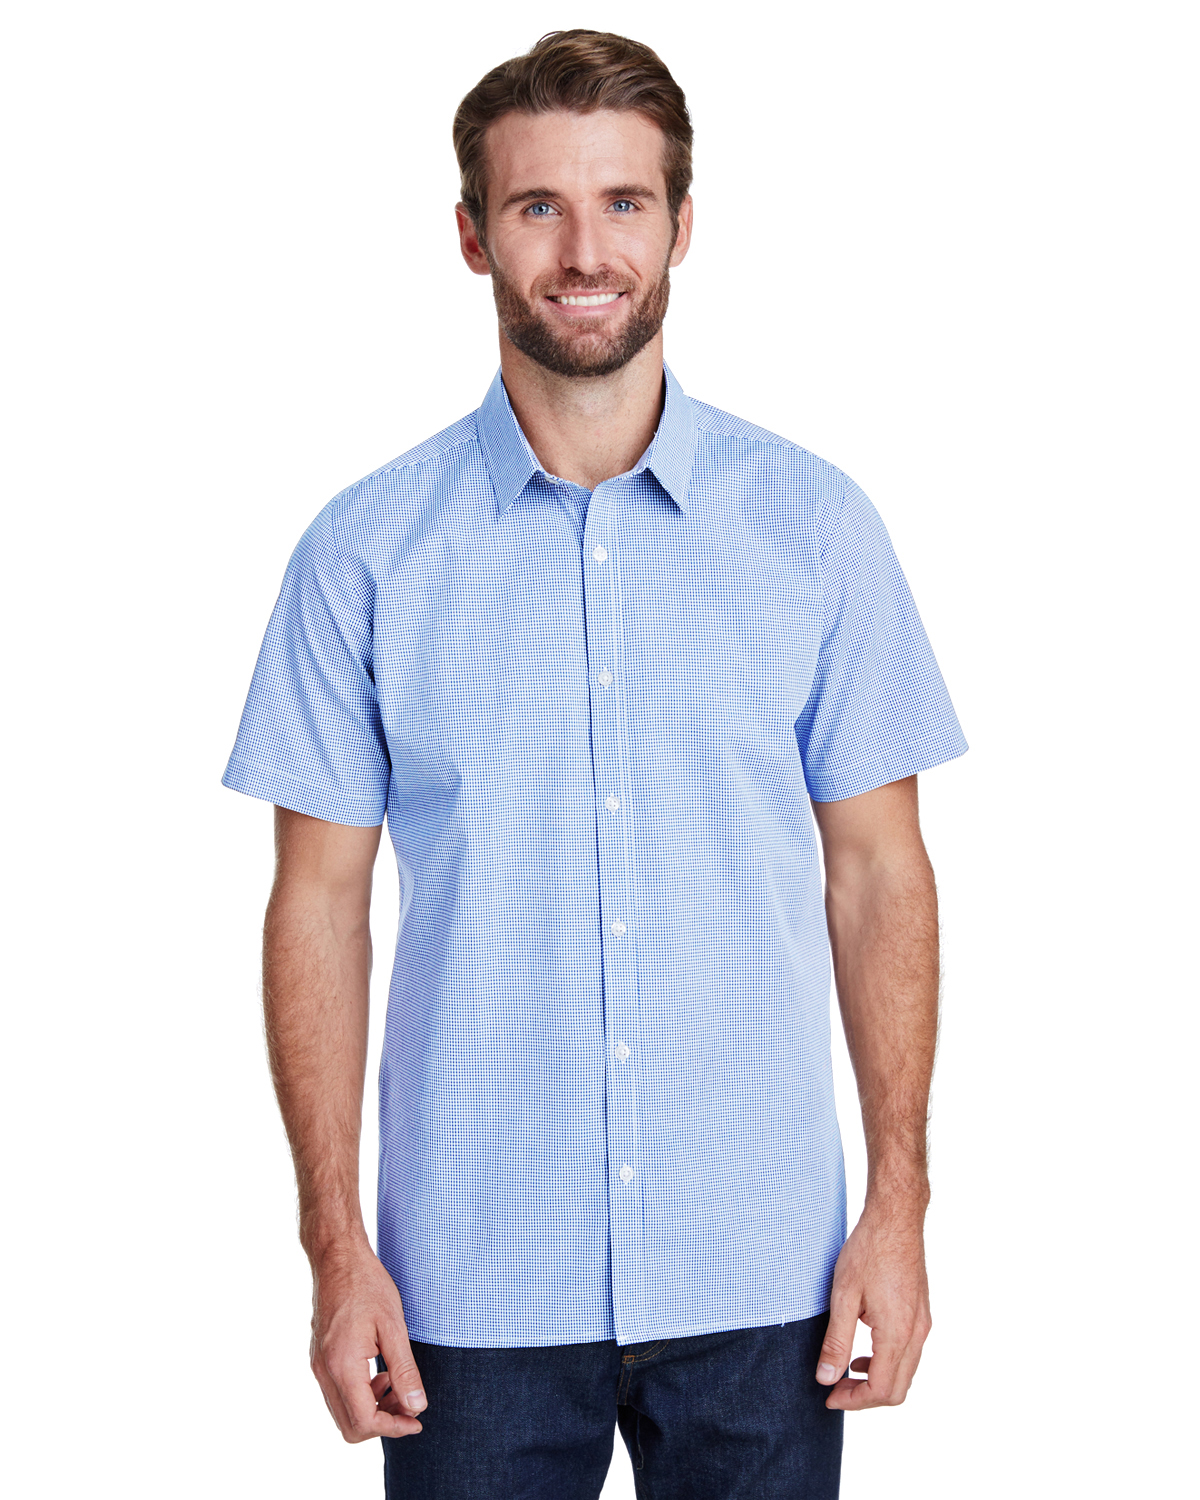 RP221   Artisan Collection by Reprime Mens Microcheck Gingham Short-Sleeve Cotton Shirt